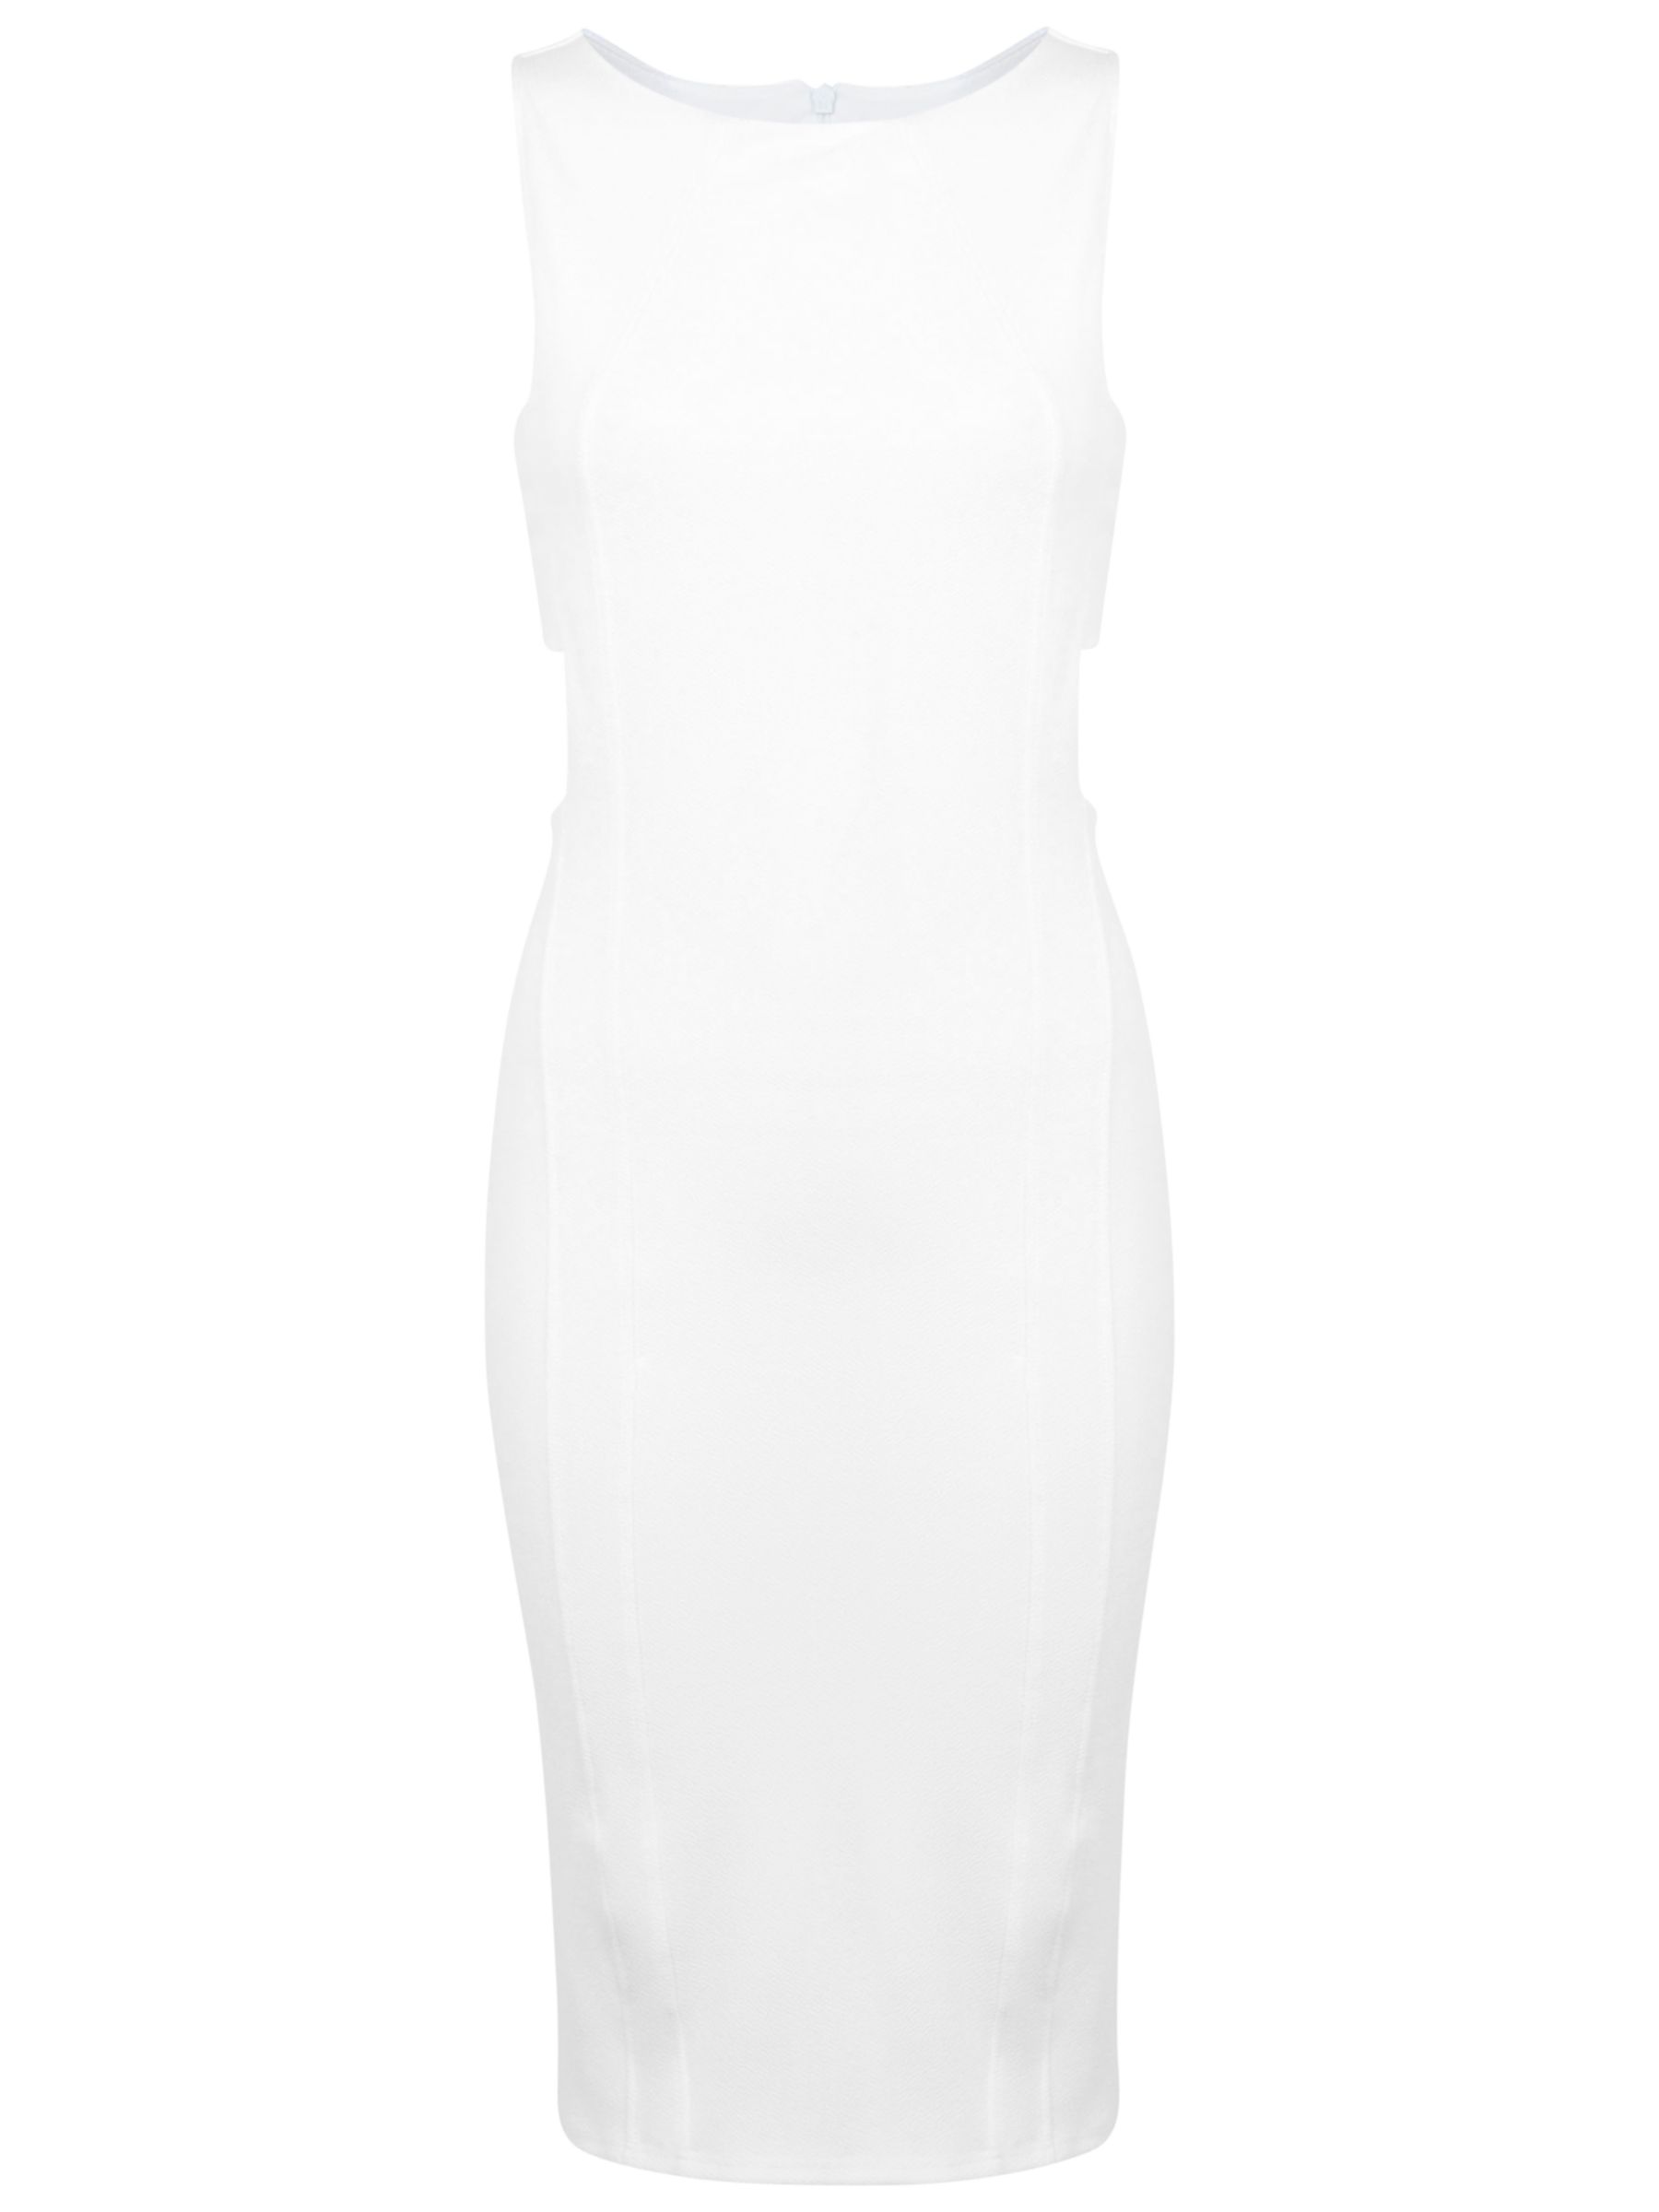 Buy Miss Selfridge Cut Out Side Bodycon Dress, White Online at ...